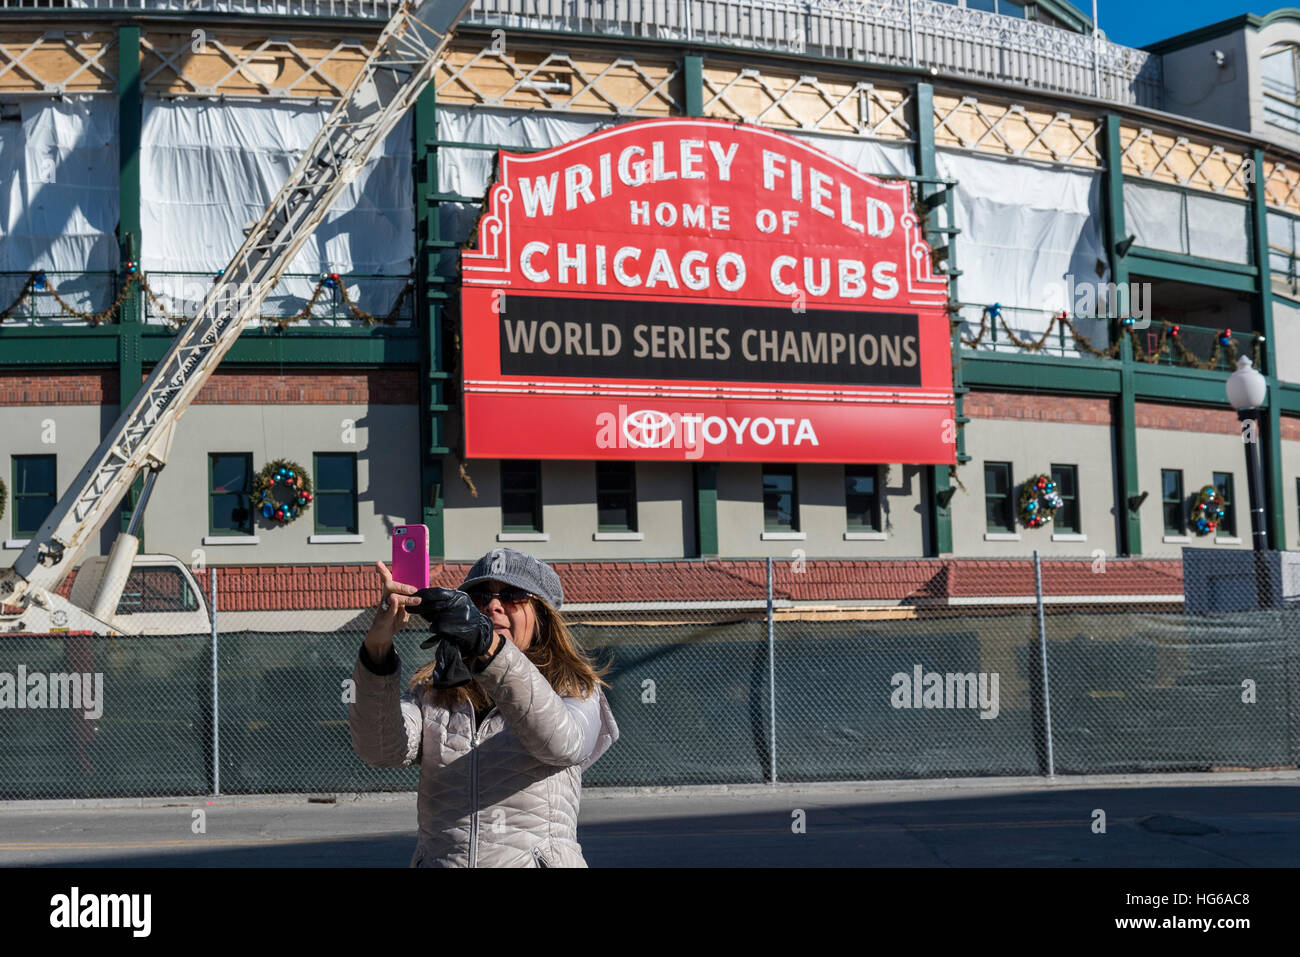 Chicago, USA. 4th Jan, 2017. A tourist takes a selfie at Wrigley Field, the home of baseball's Chicago Cubs, and current World Series Champions, which is currrently undergoing refurbishment and reconstruction. Works include construction of The Hotel Zachary as well as a new retail/entertainment complex at Addison & Clark. © Stephen Chung/Alamy Live News Stock Photo